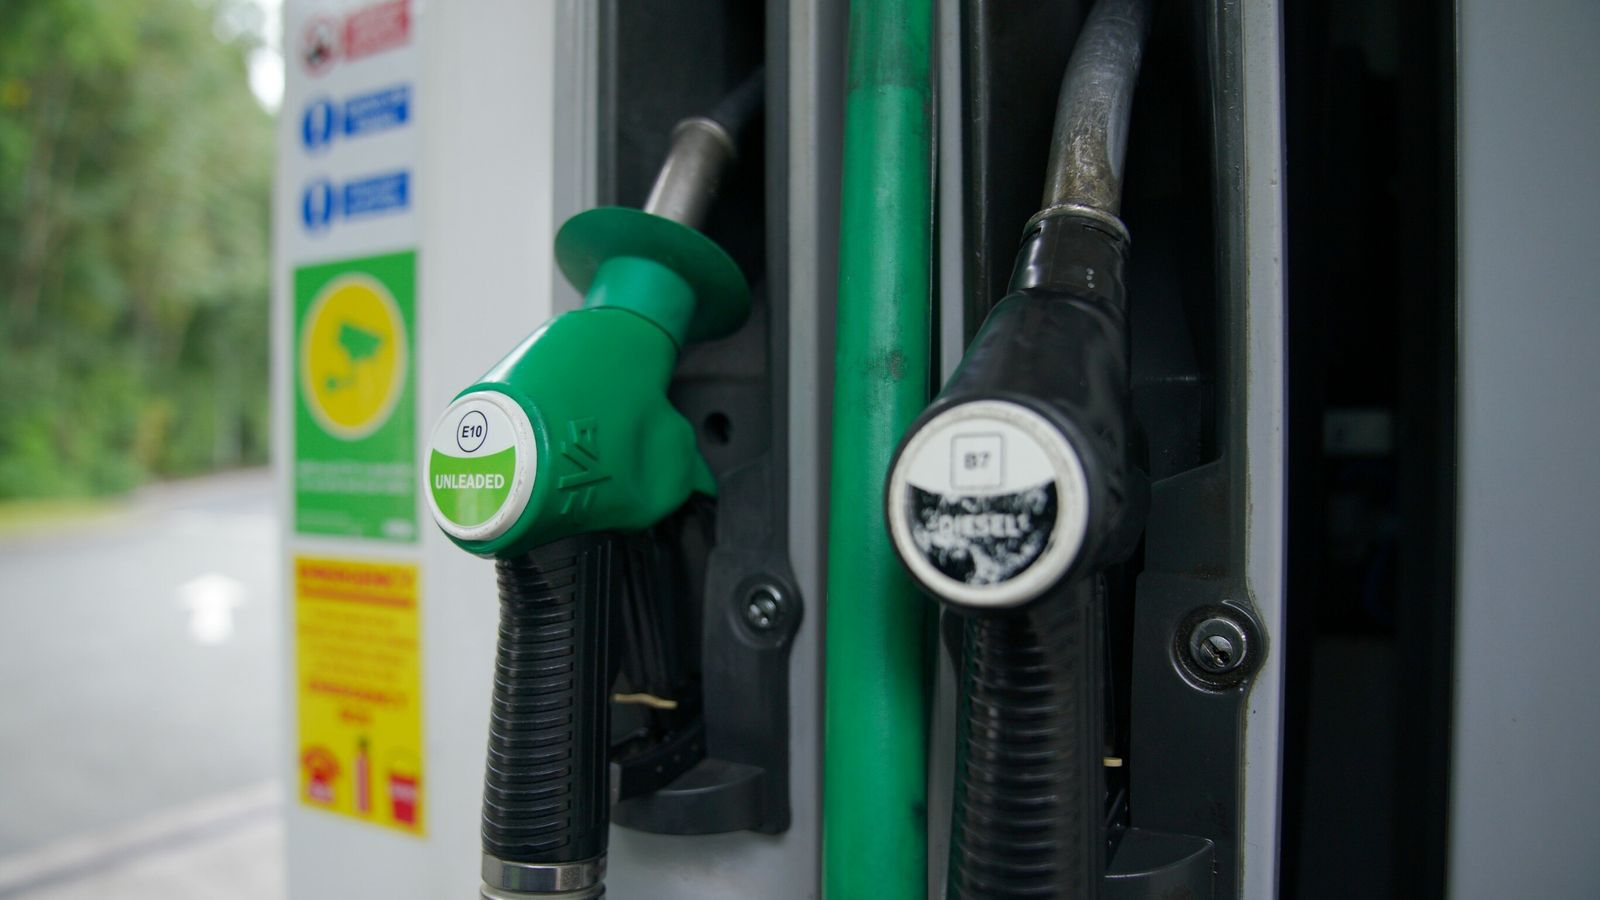 Drivers paid higher pump prices after supermarkets increased margins - watchdog